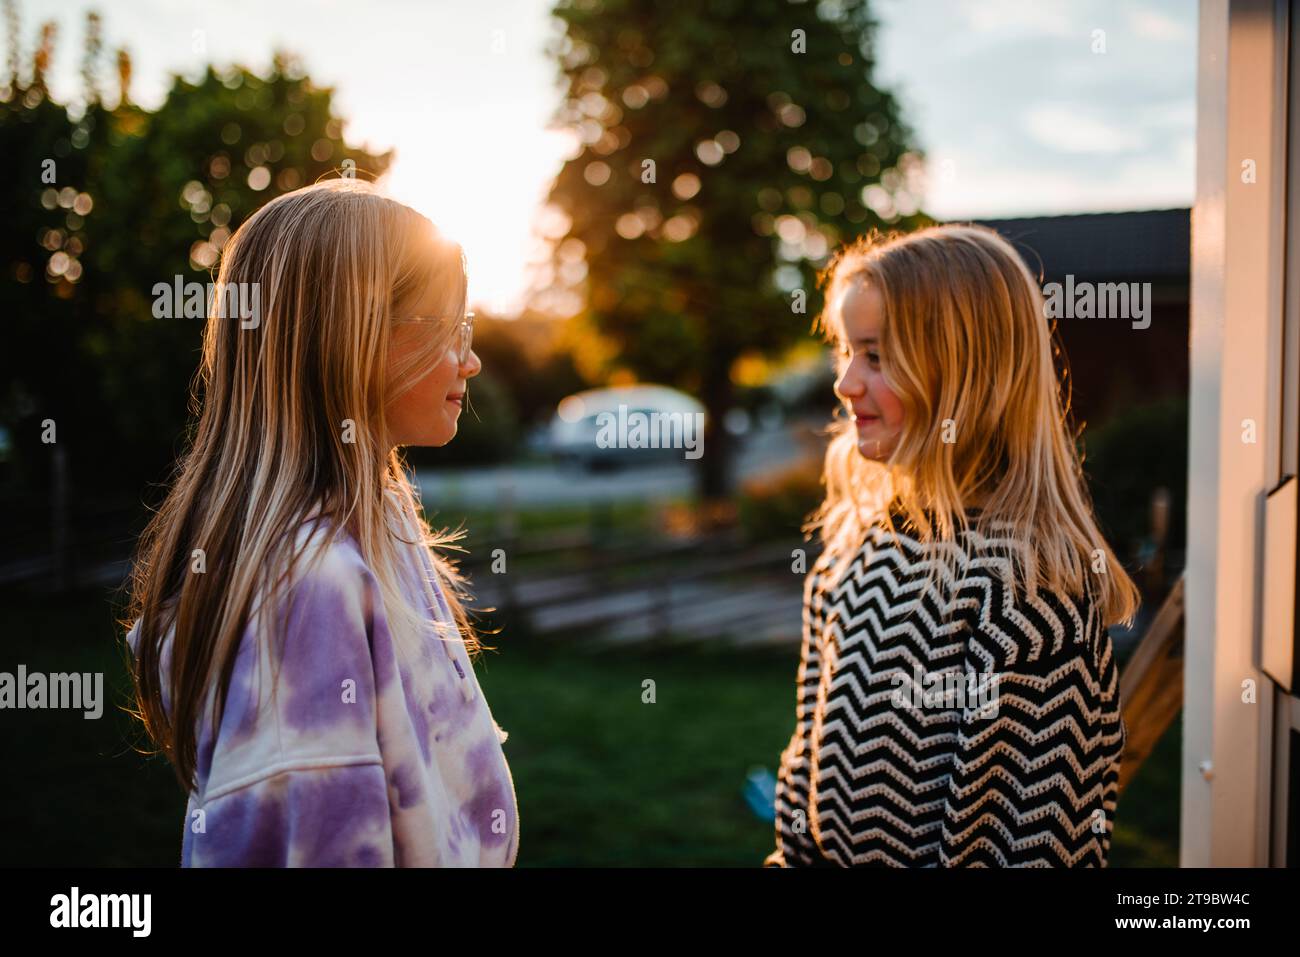 Smiling female friends with blond hair looking at each other Stock Photo